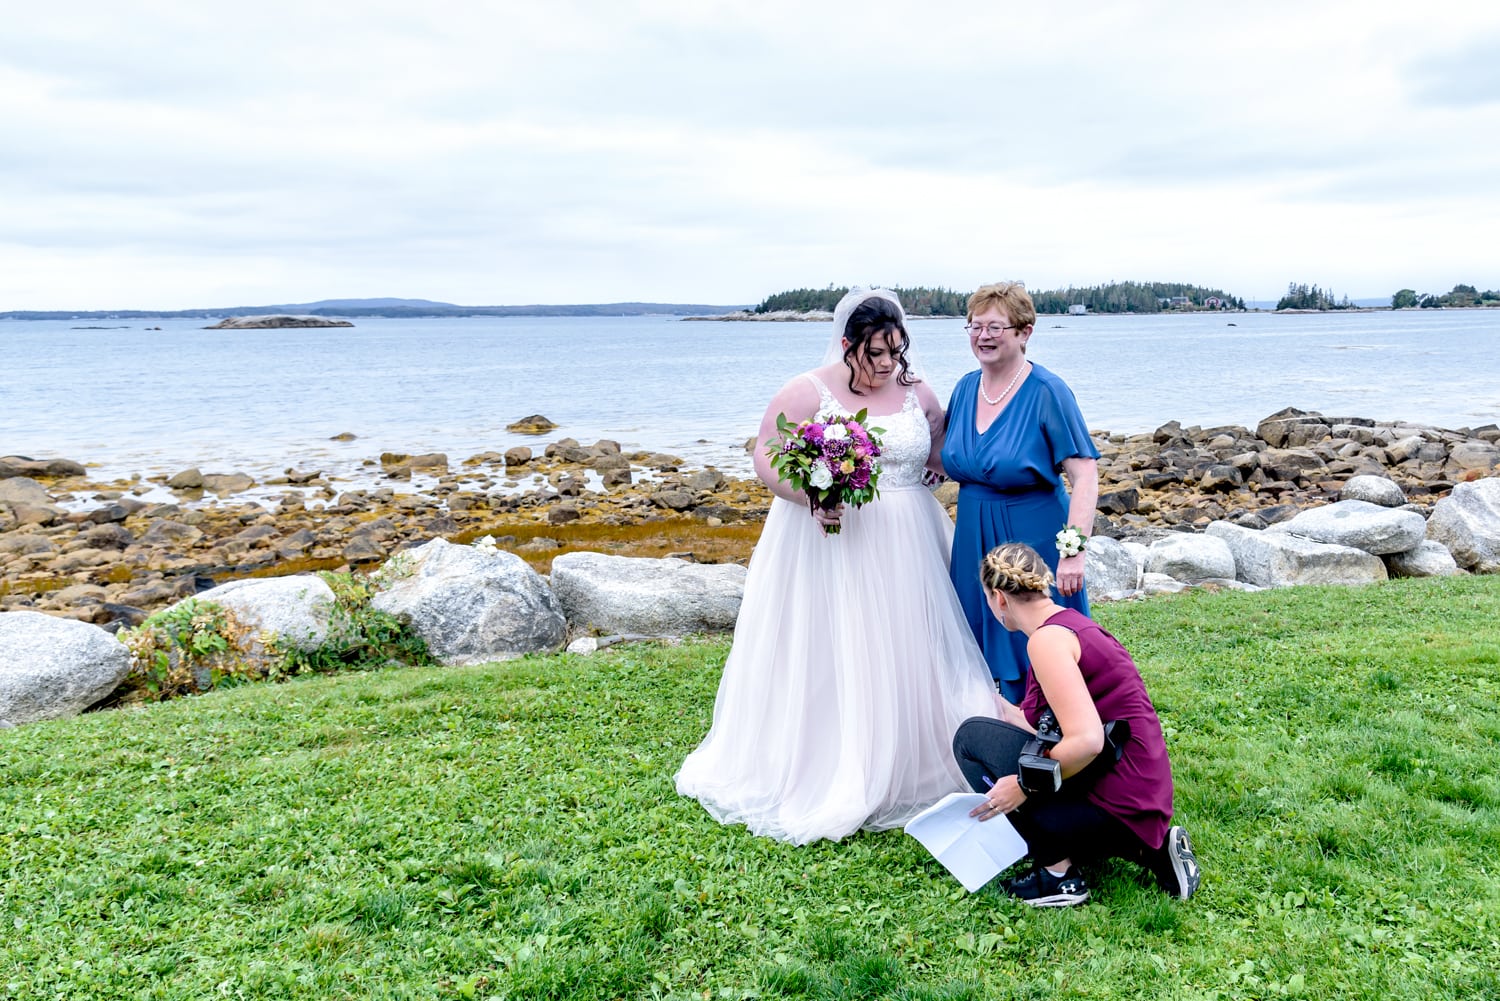 Sandra Adamson's team member fans out a bride's dress during wedding photos at the Oceanstone Resort in NS.